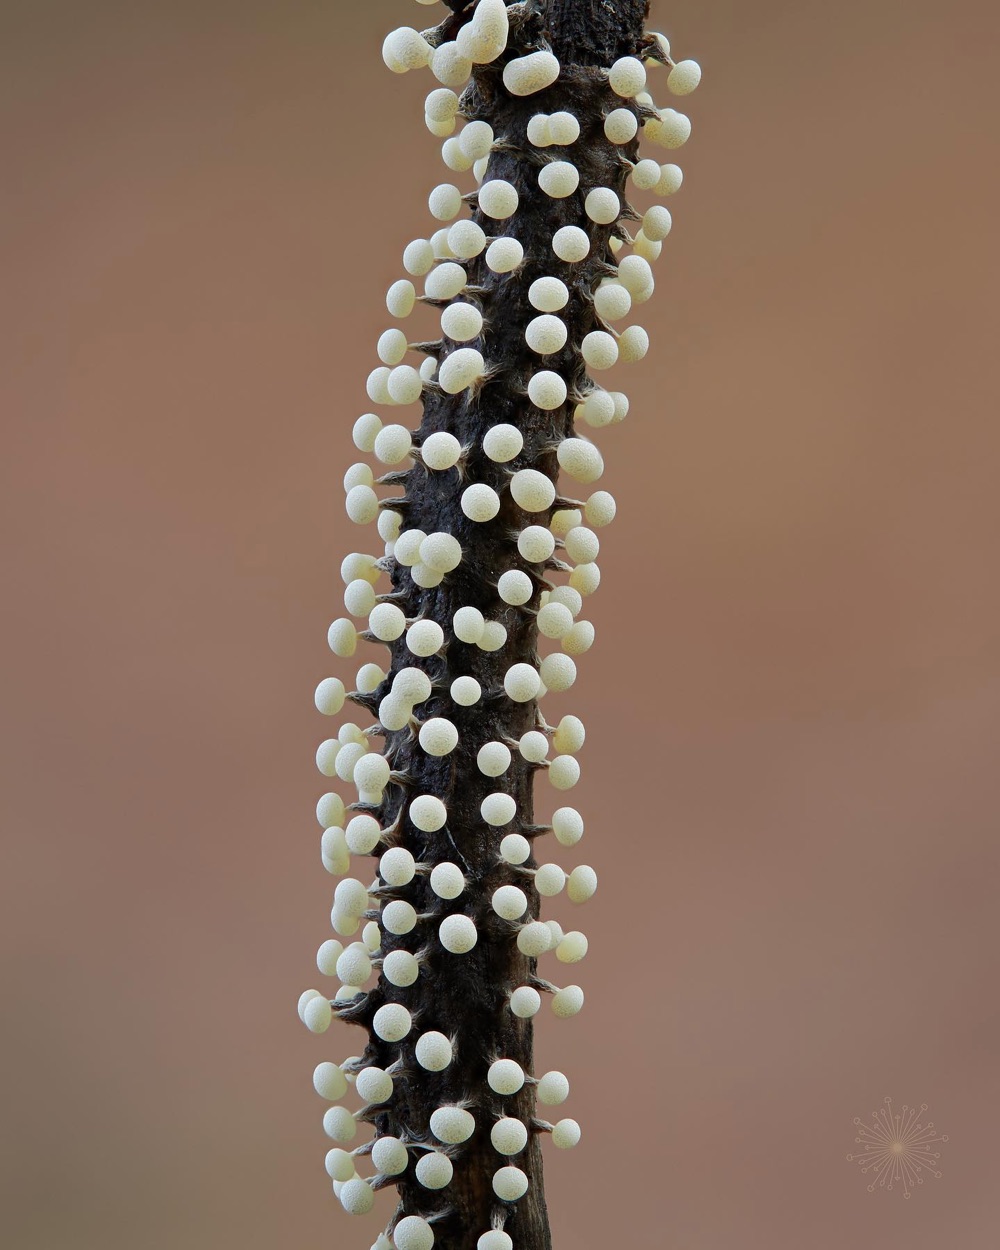 a slime mold with white globules on a black stalk